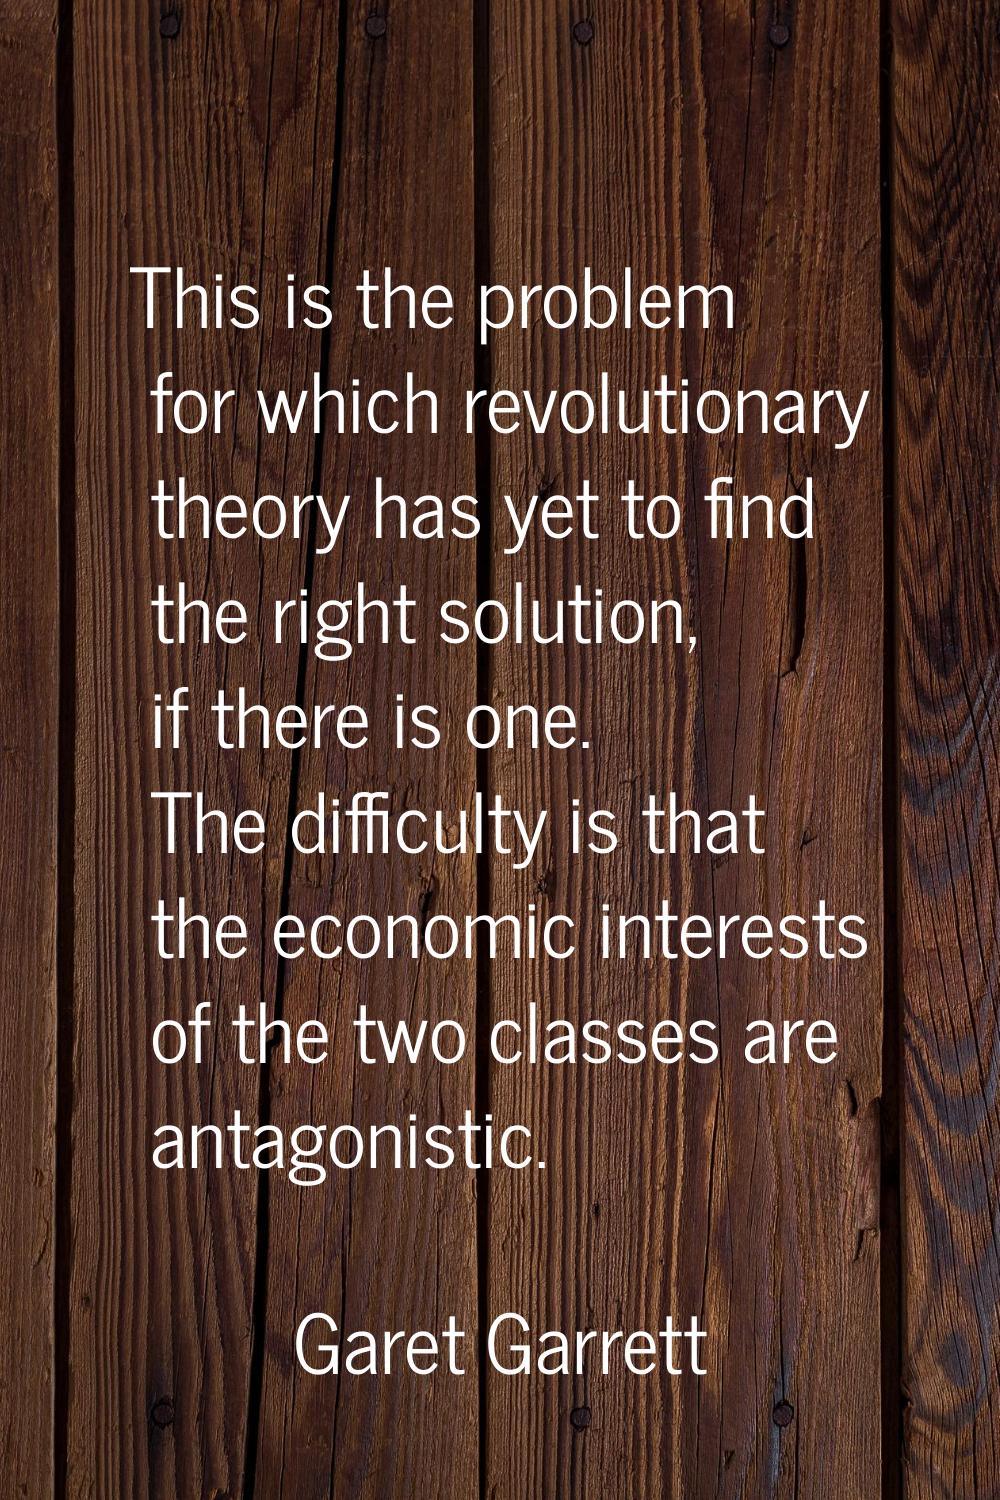 This is the problem for which revolutionary theory has yet to find the right solution, if there is 